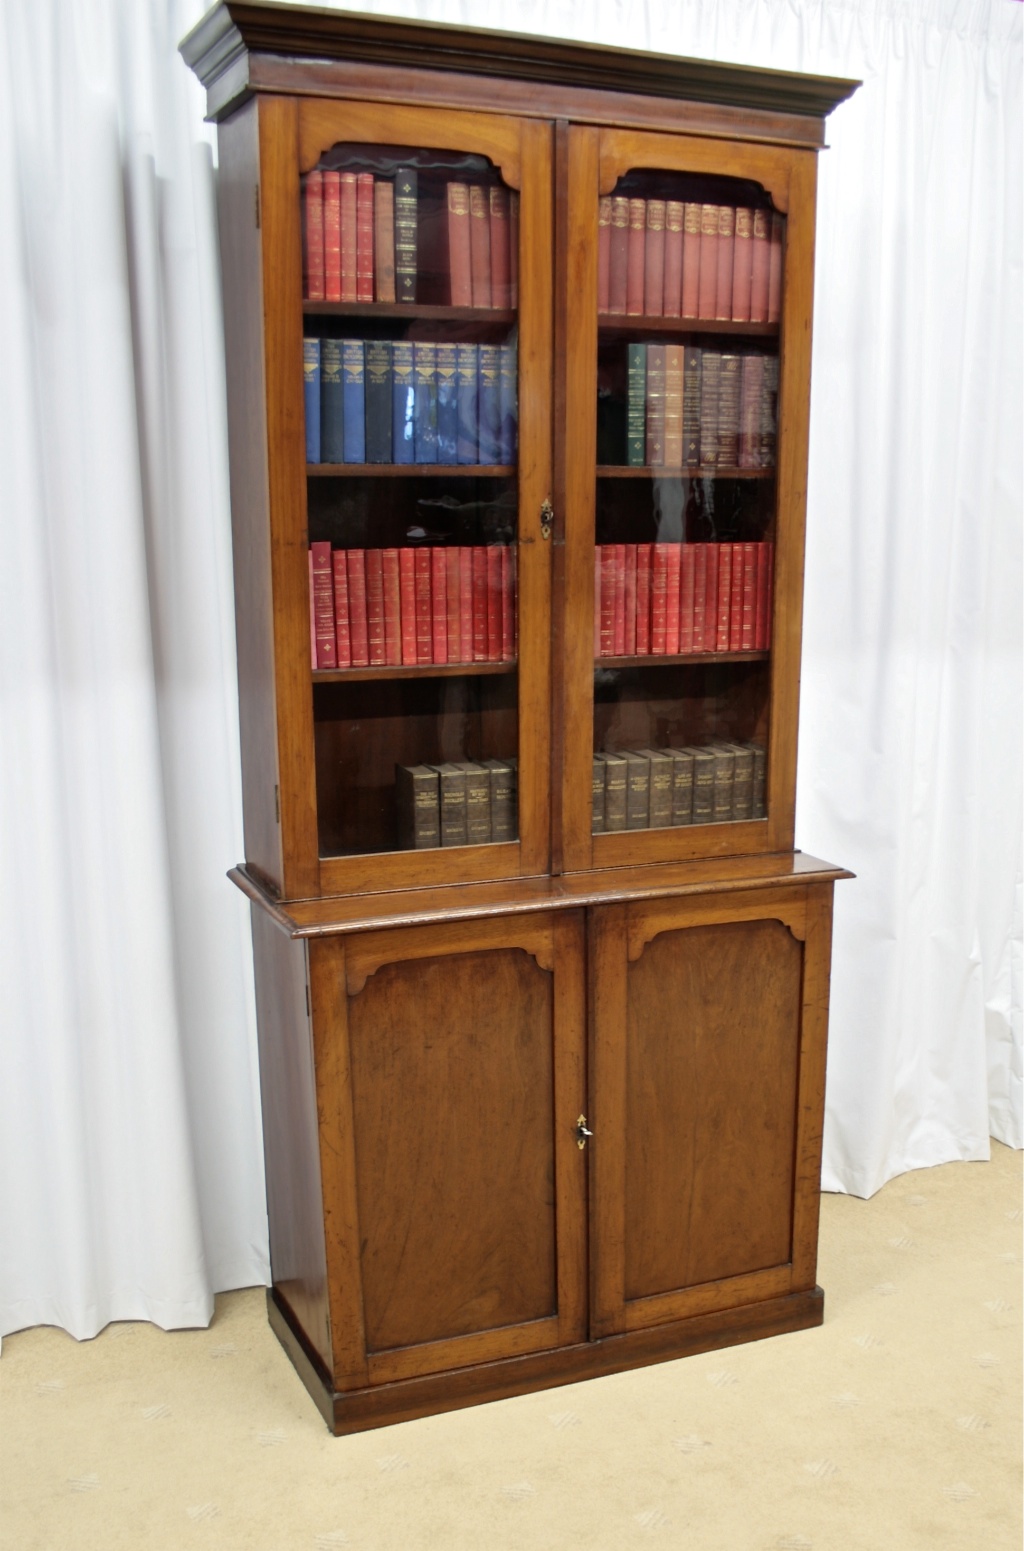 New Bookcases For Sale for Small Space